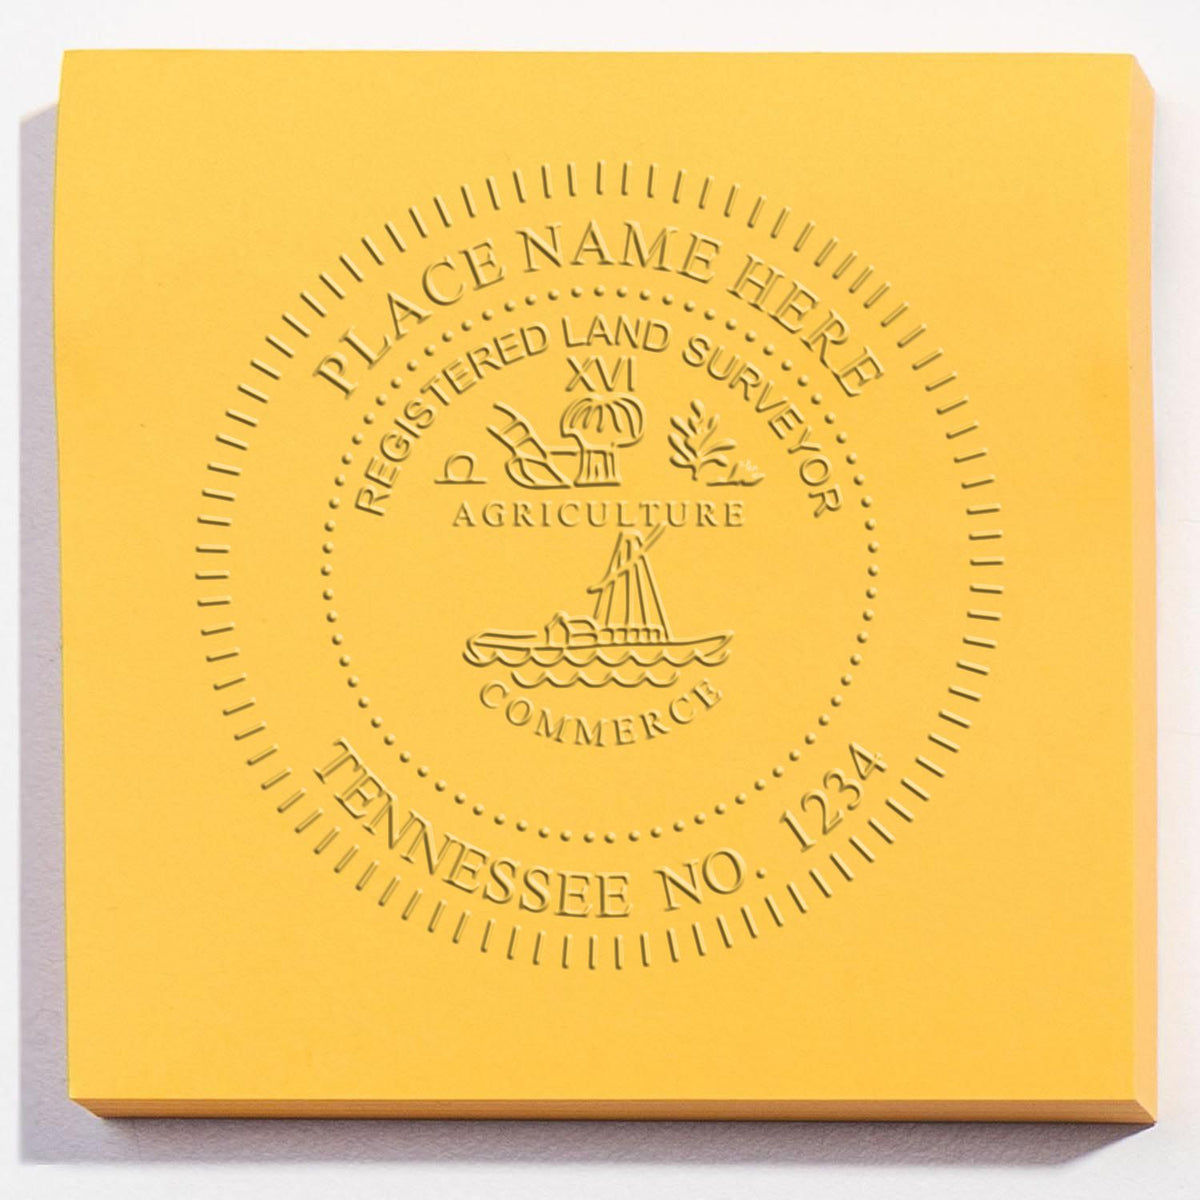 A photograph of the Hybrid Tennessee Land Surveyor Seal stamp impression reveals a vivid, professional image of the on paper.